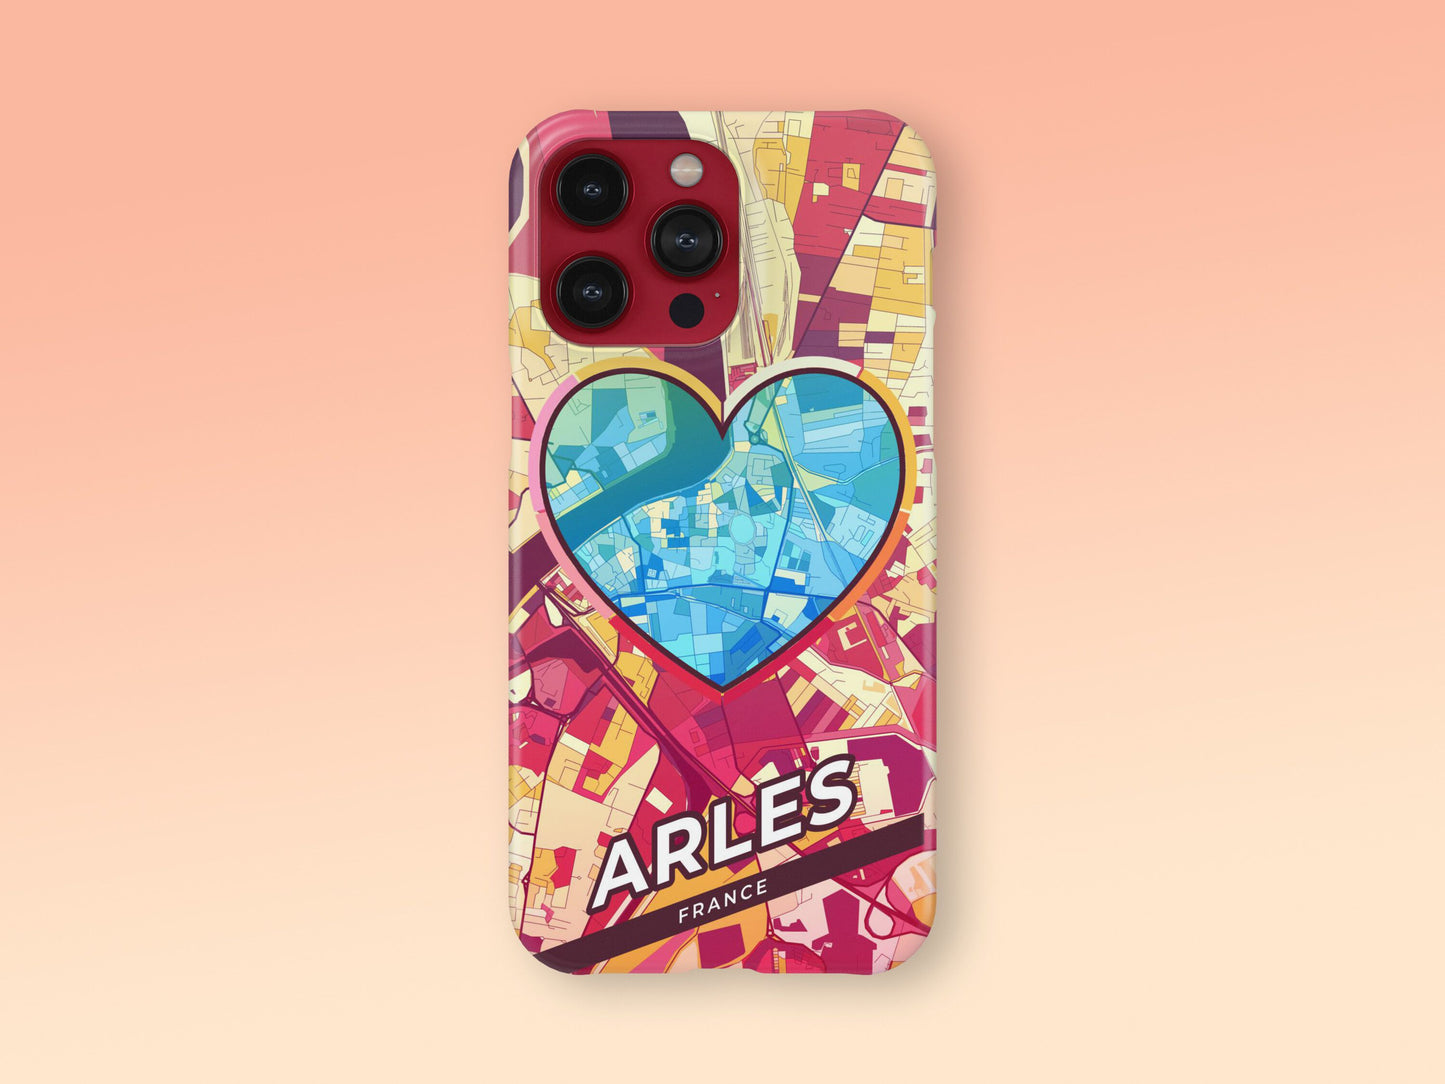 Arles France slim phone case with colorful icon. Birthday, wedding or housewarming gift. Couple match cases. 2